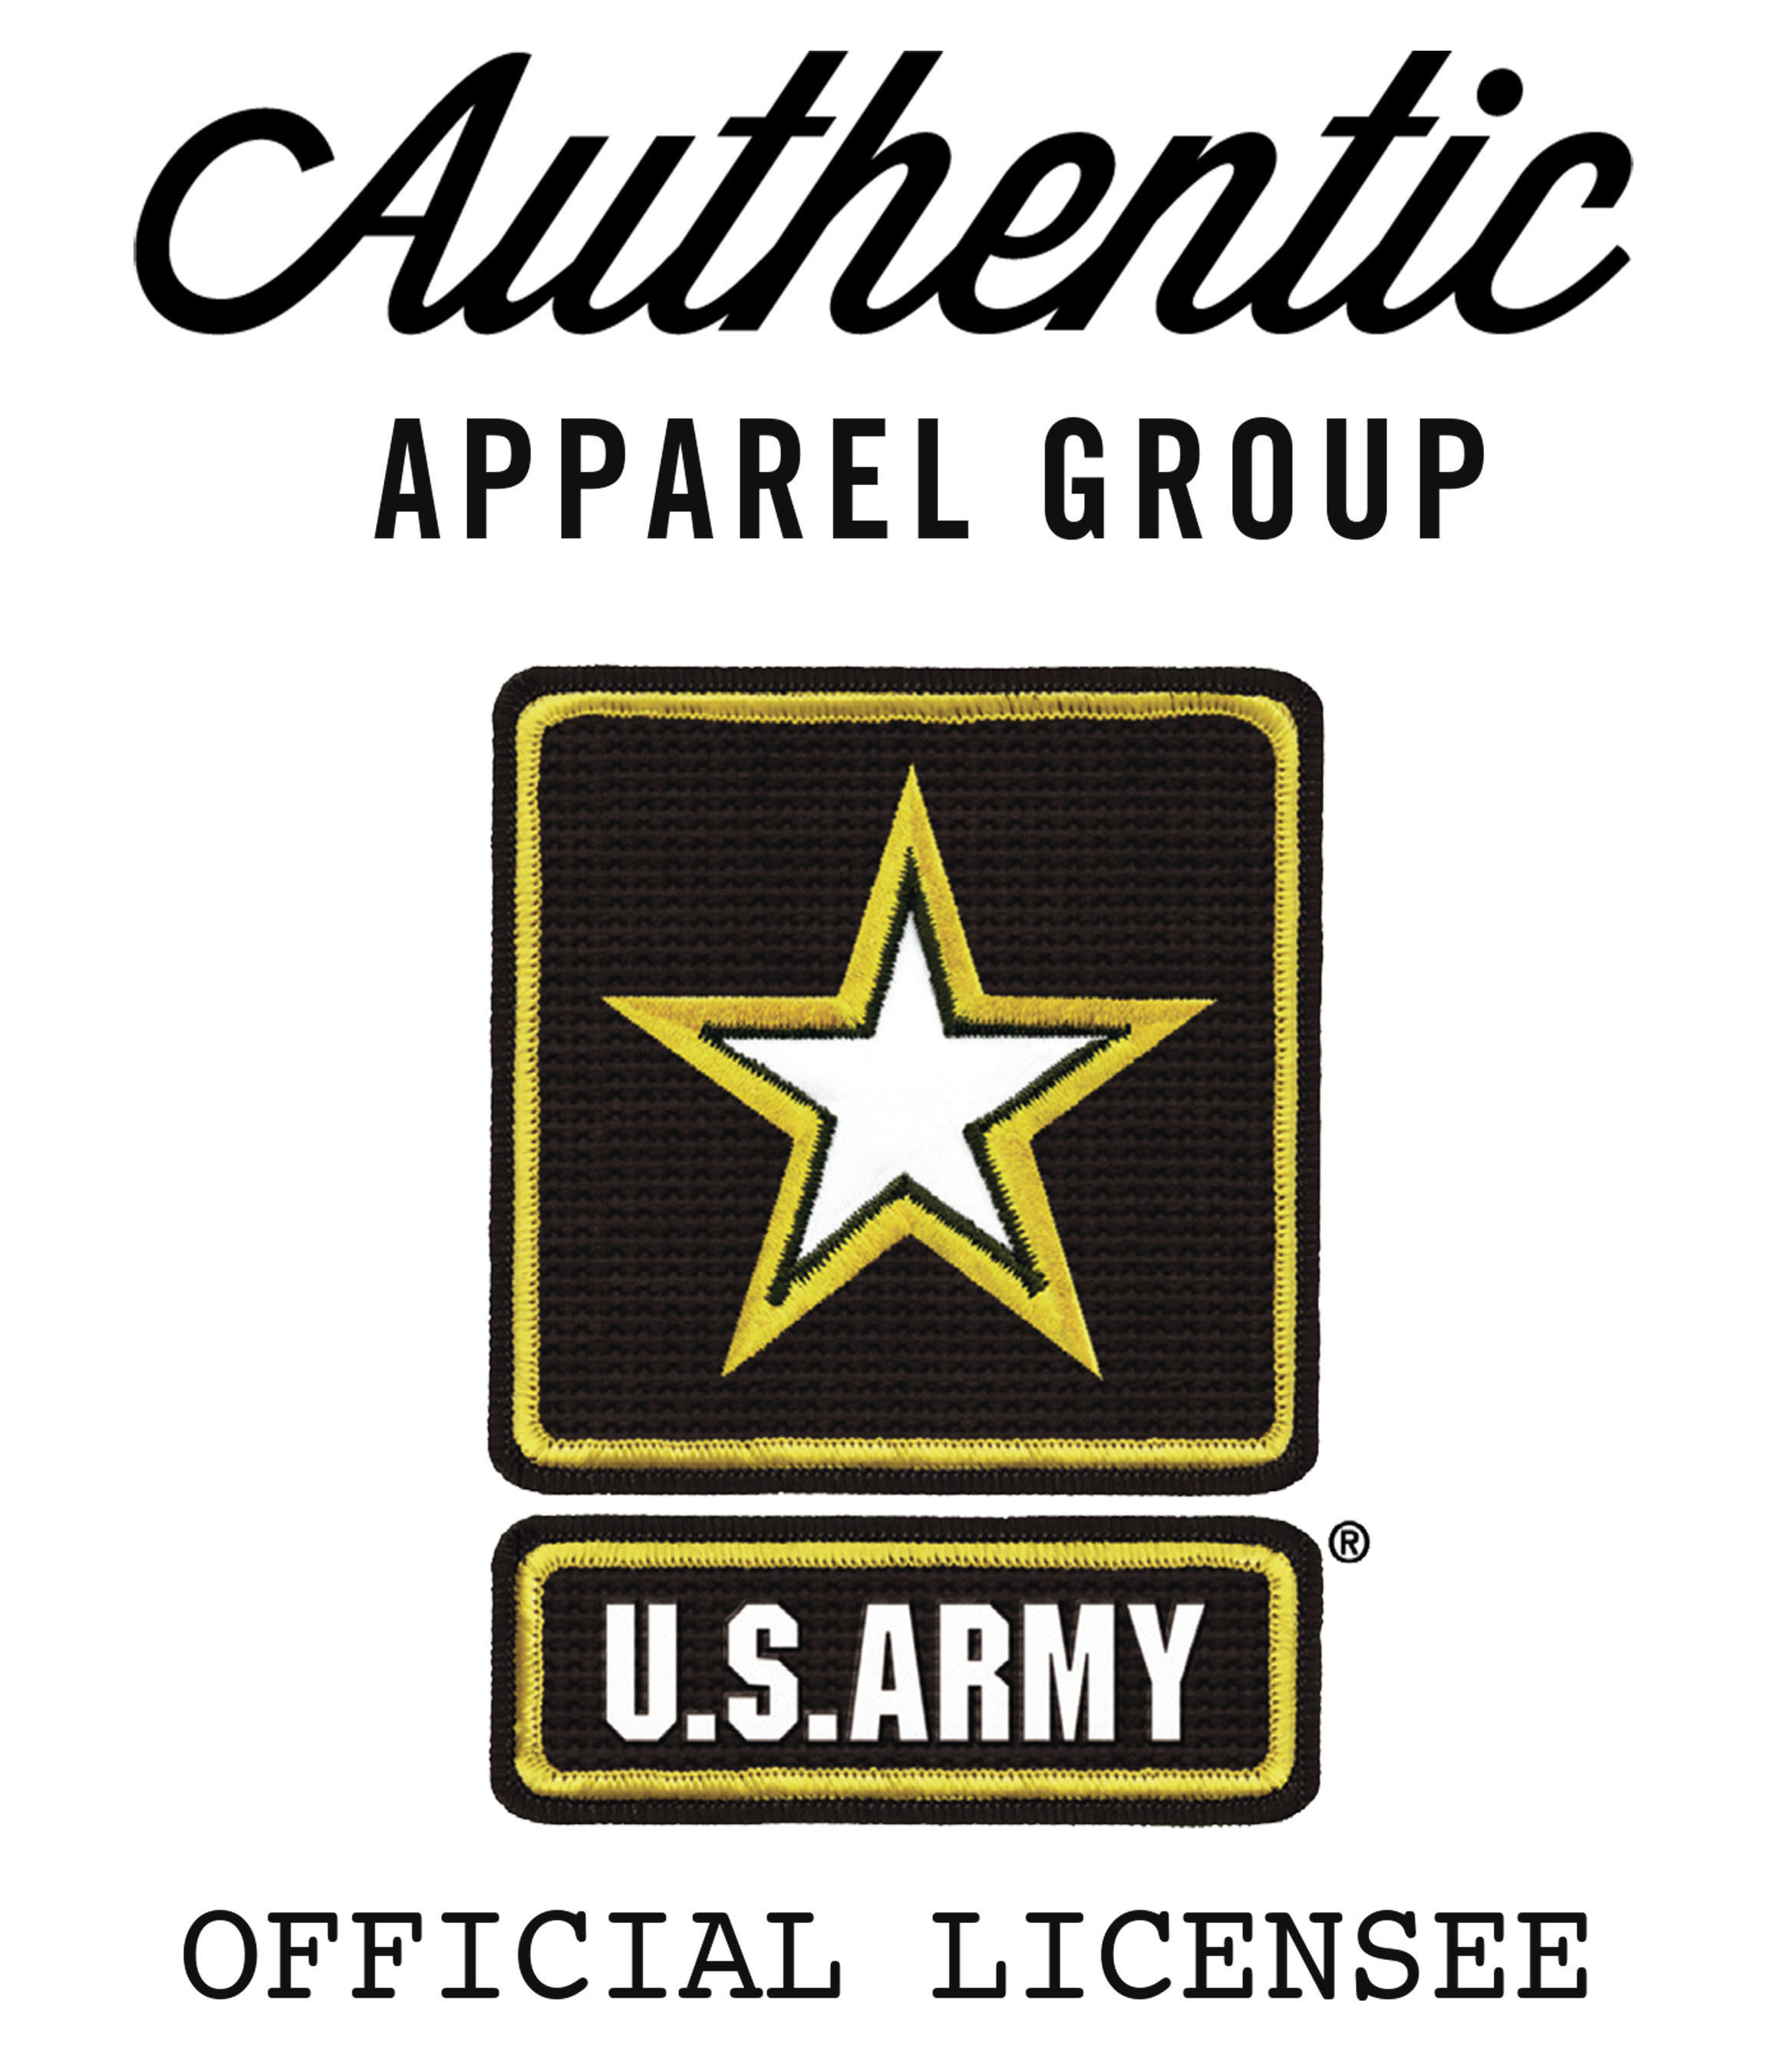 Authentic Apparel Group Launches Apparel Line with Partner Dwayne